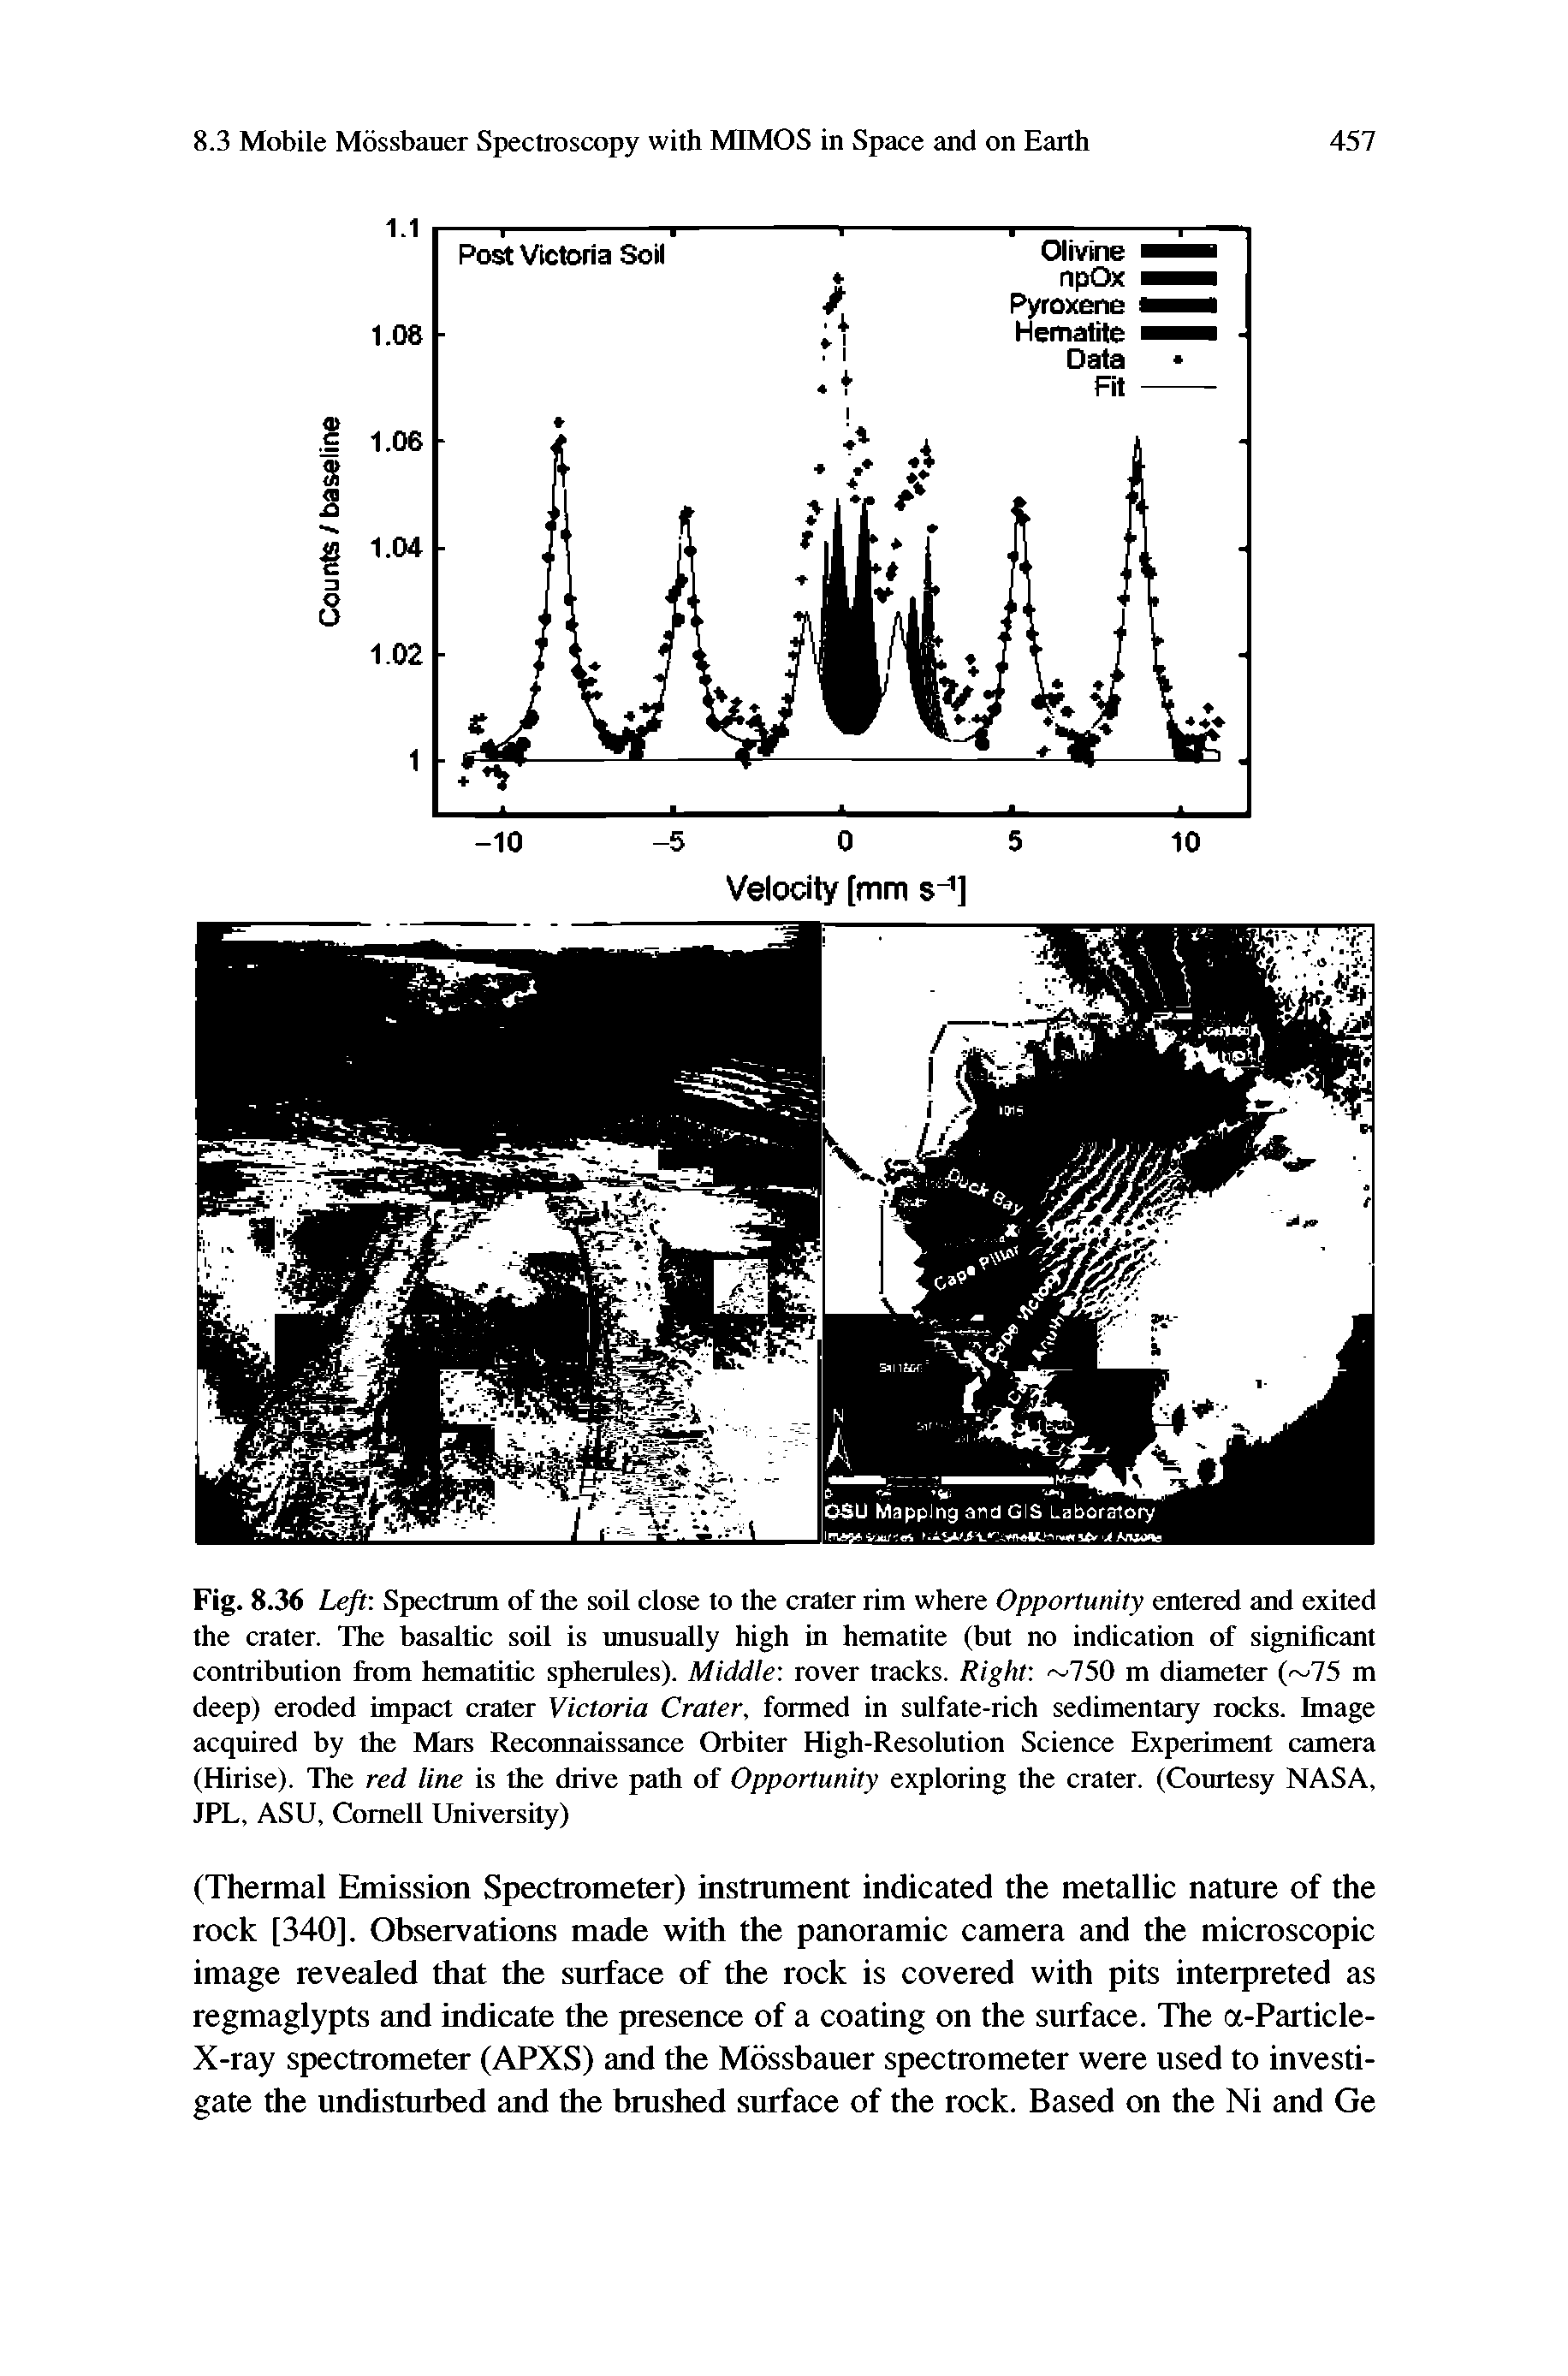 Fig. 8.36 Leyt Spectrum of the soil close to the crater rim where Opportunity entered and exited the crater. The basaltic soil is unusually high in hematite (but no indication of significant contribution Irom hematitic spherules). Middle rover tracks. Right 750 m diameter (. 75 m deep) eroded impact crater Victoria Crater, formed in sulfate-rich sedimentary rocks. Image acquired by the Mars Reconnaissance Orbiter High-Resolution Science Experiment camera (Hirise). The red line is the drive path of Opportunity exploring the crater. (Courtesy NASA, JPL, ASU, Cornell University)...